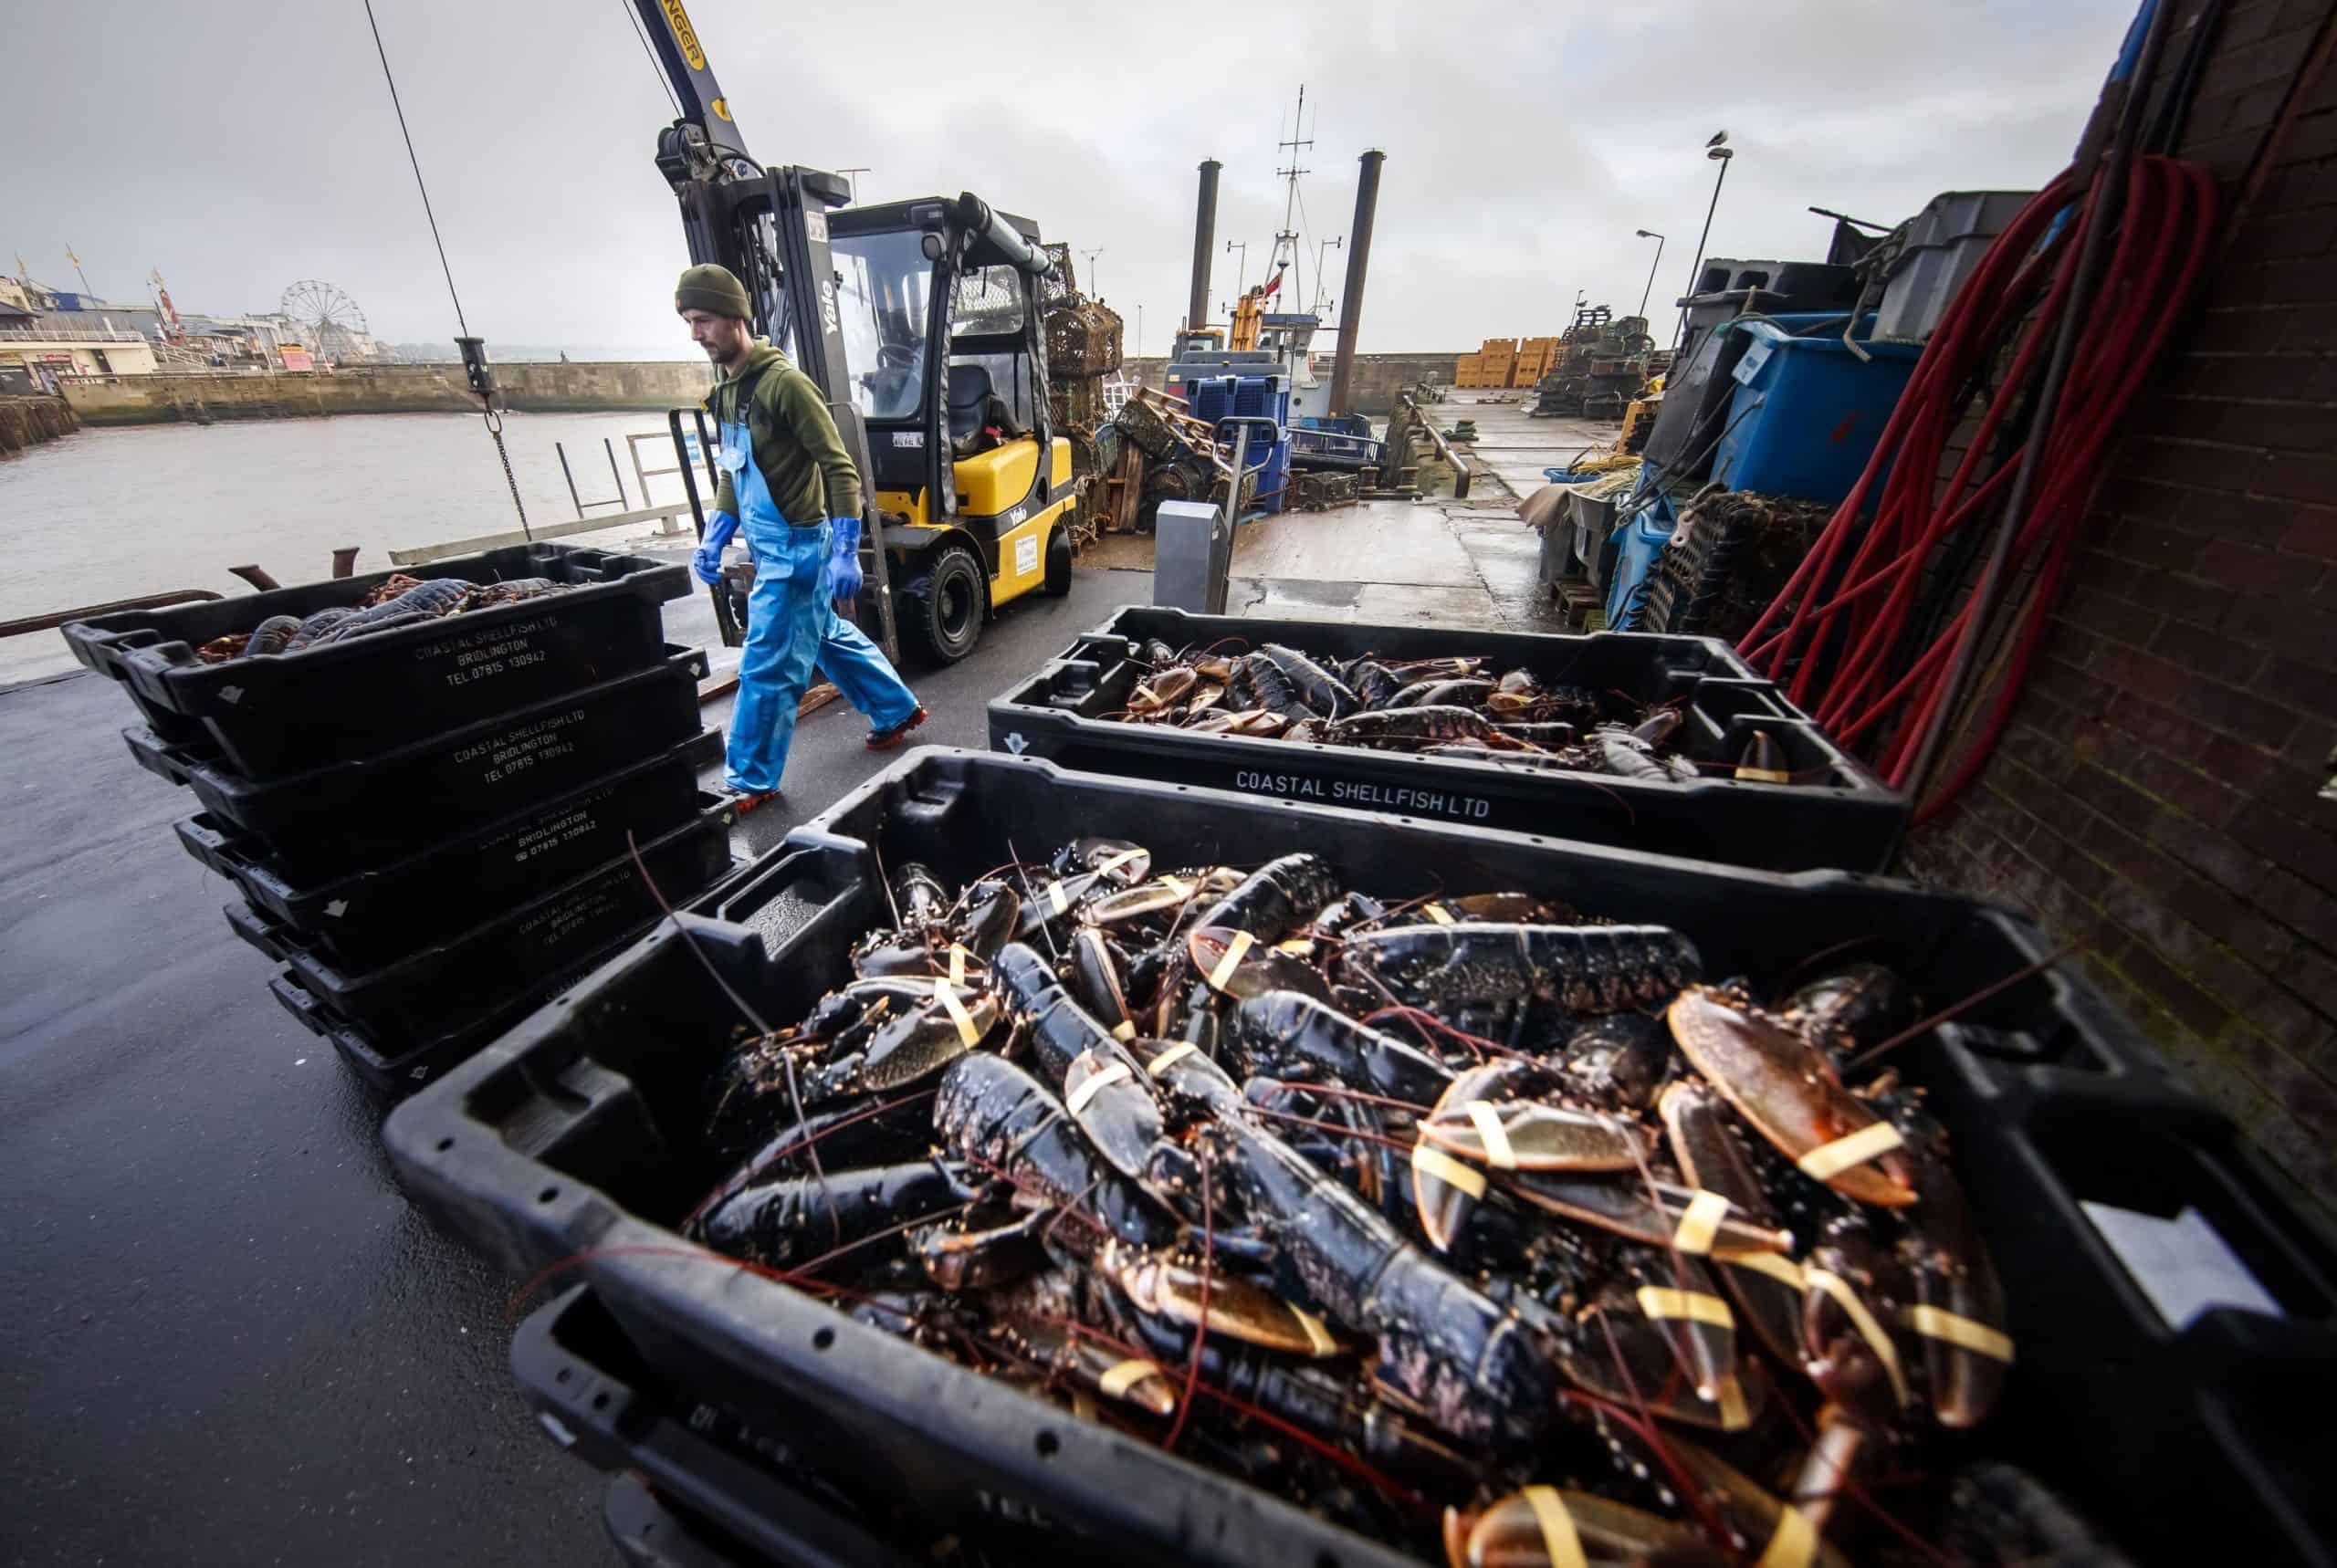 Fishing industry could be ‘destroyed’ without customs changes, MPs warn